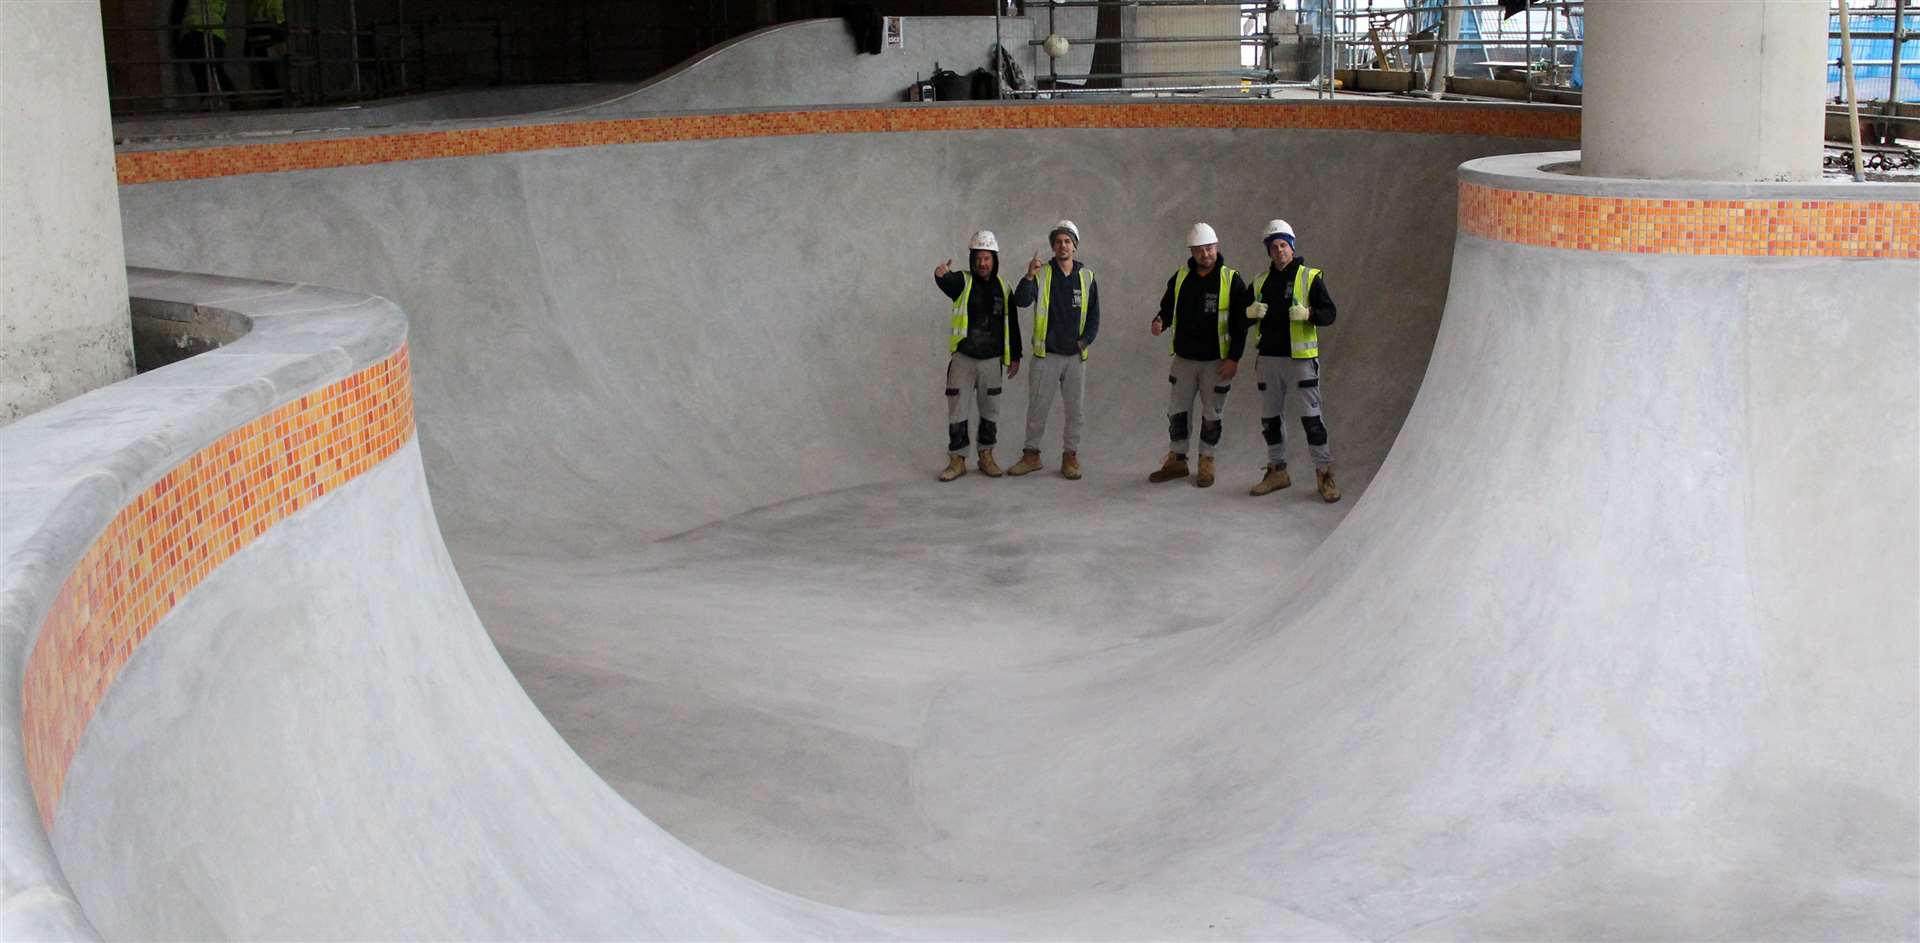 The new bowl floor at the skate park